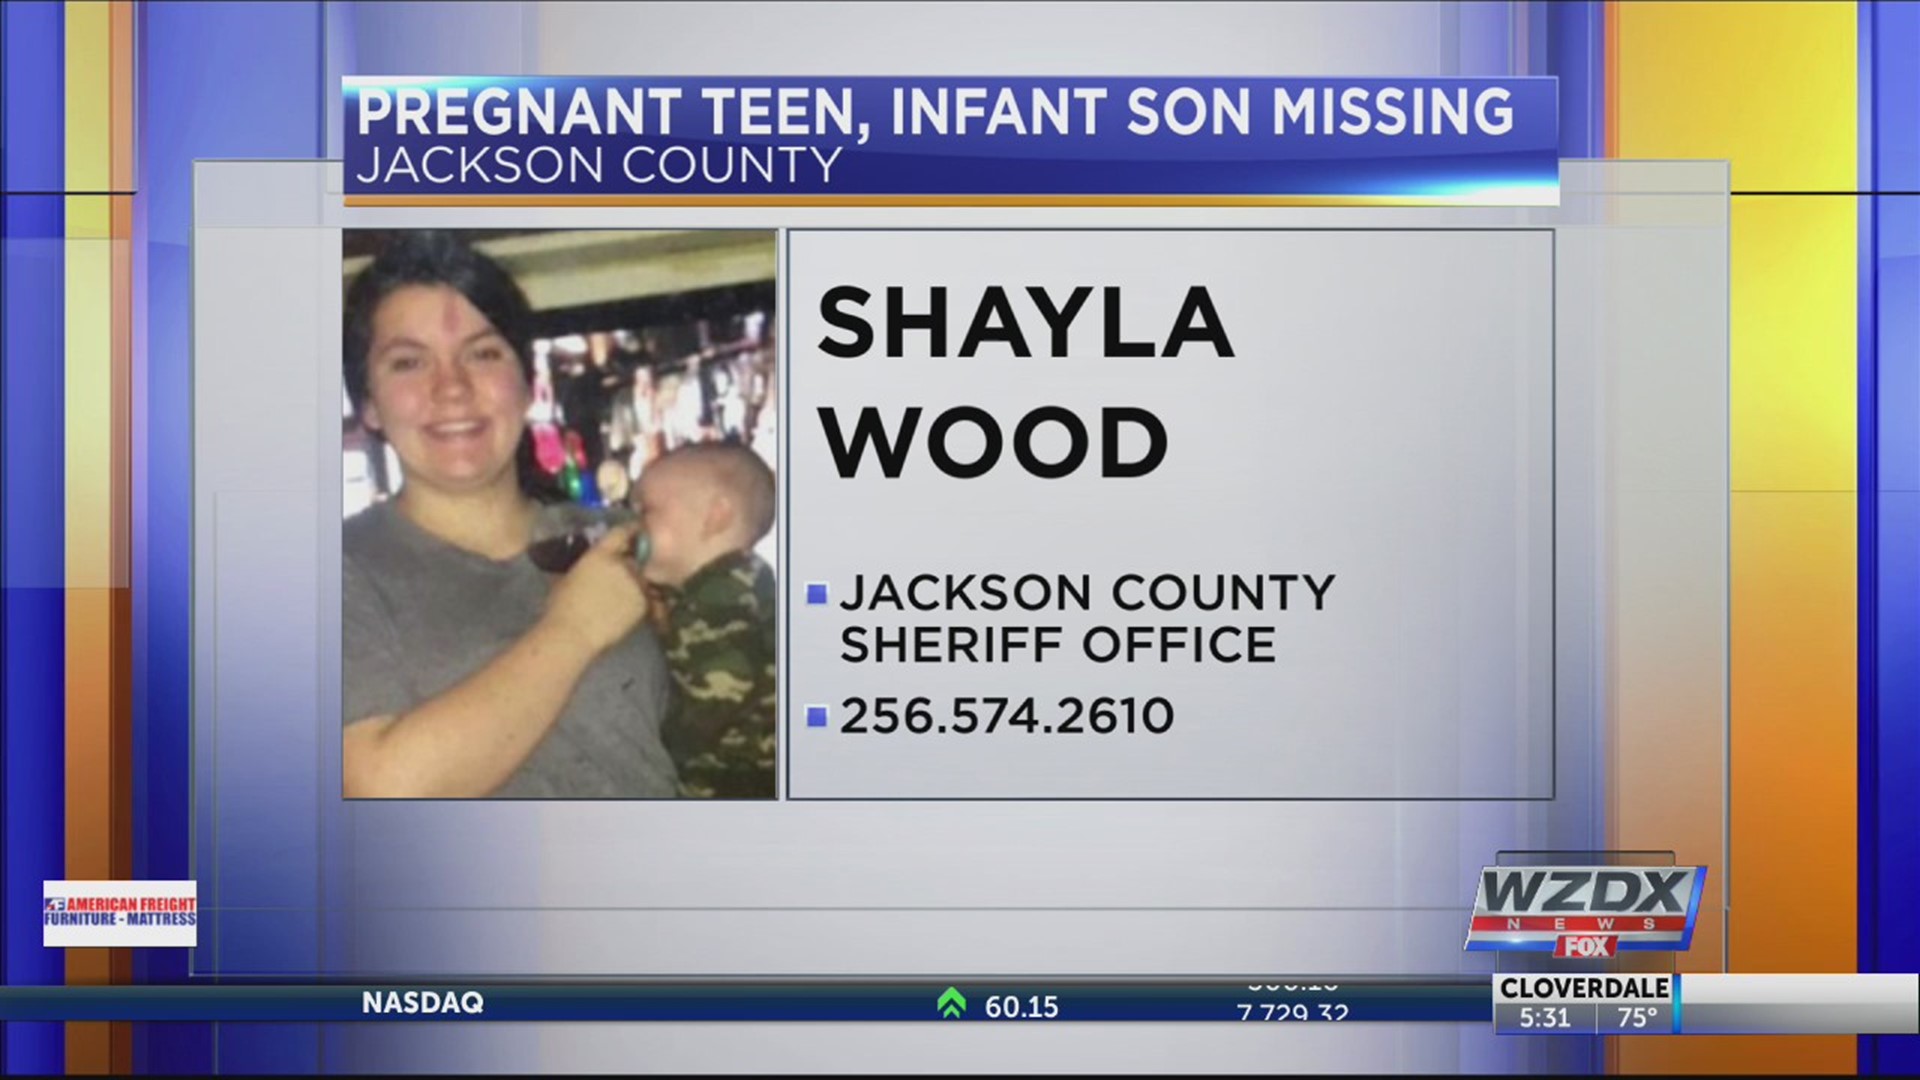 17-year-old Shayla Wood, who is 8 months pregnant, and her 9-month-old son are missing from Flat Rock, AL. If you have any information on their whereabouts, please contact police.